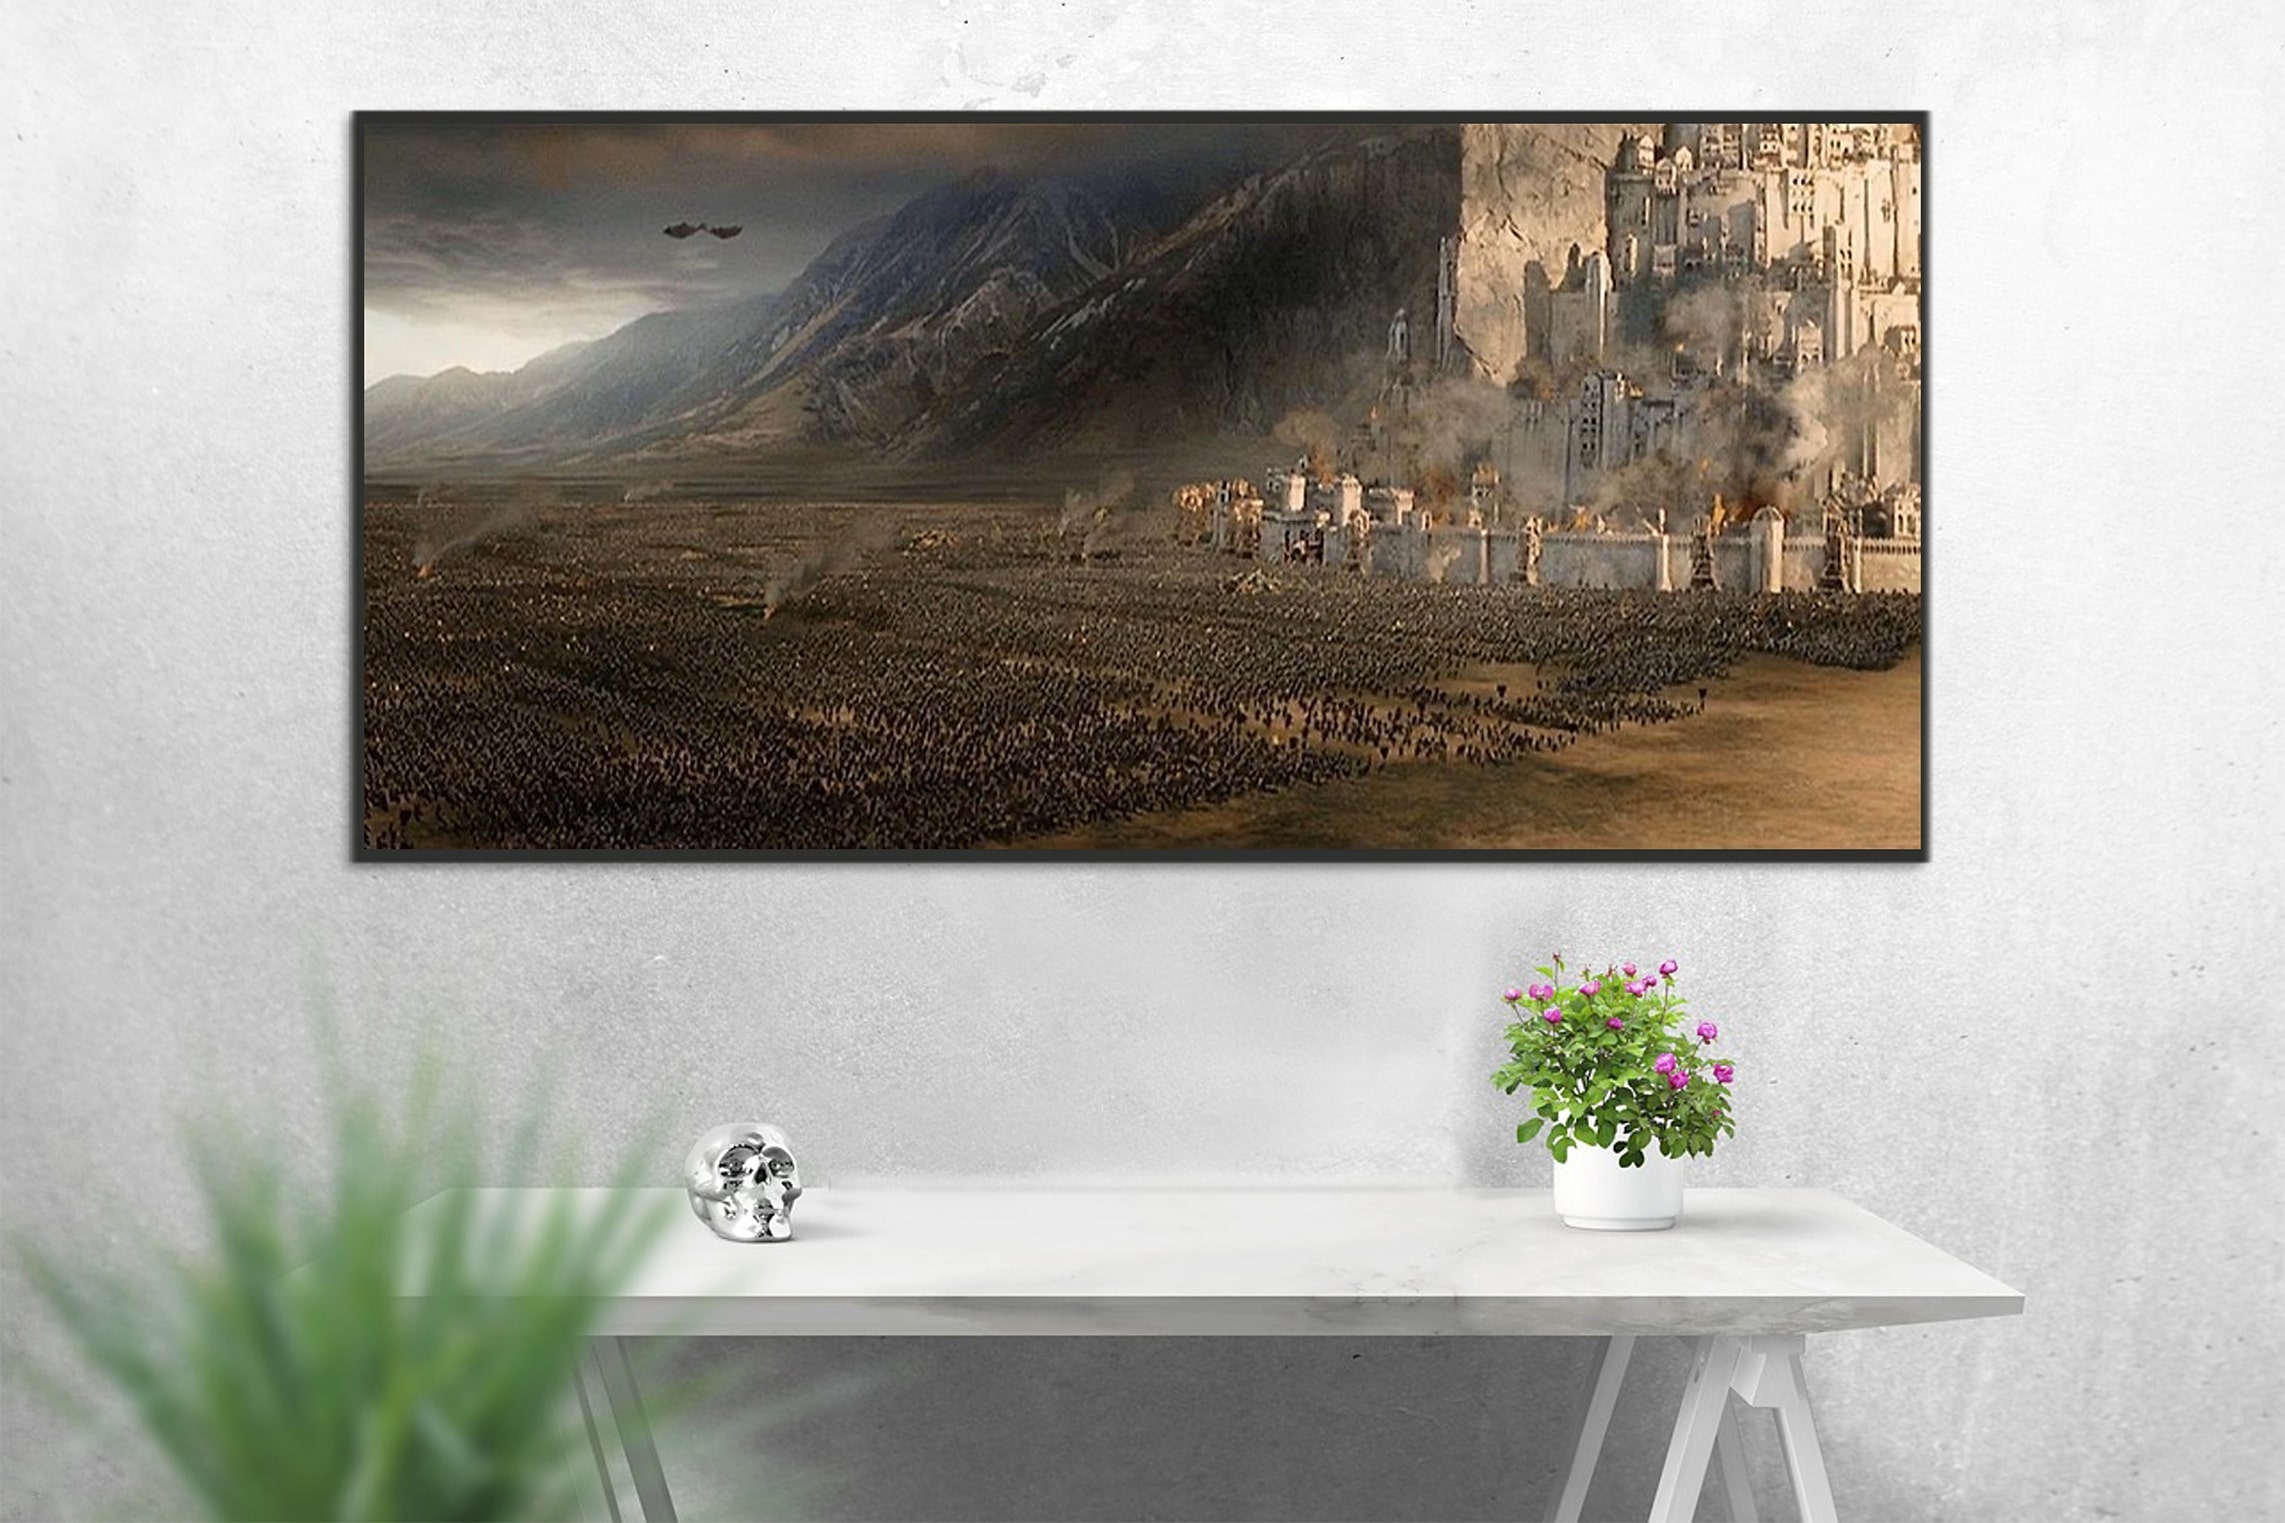 Minas Tirith beautiful landscape - view more Lord of the Rings art